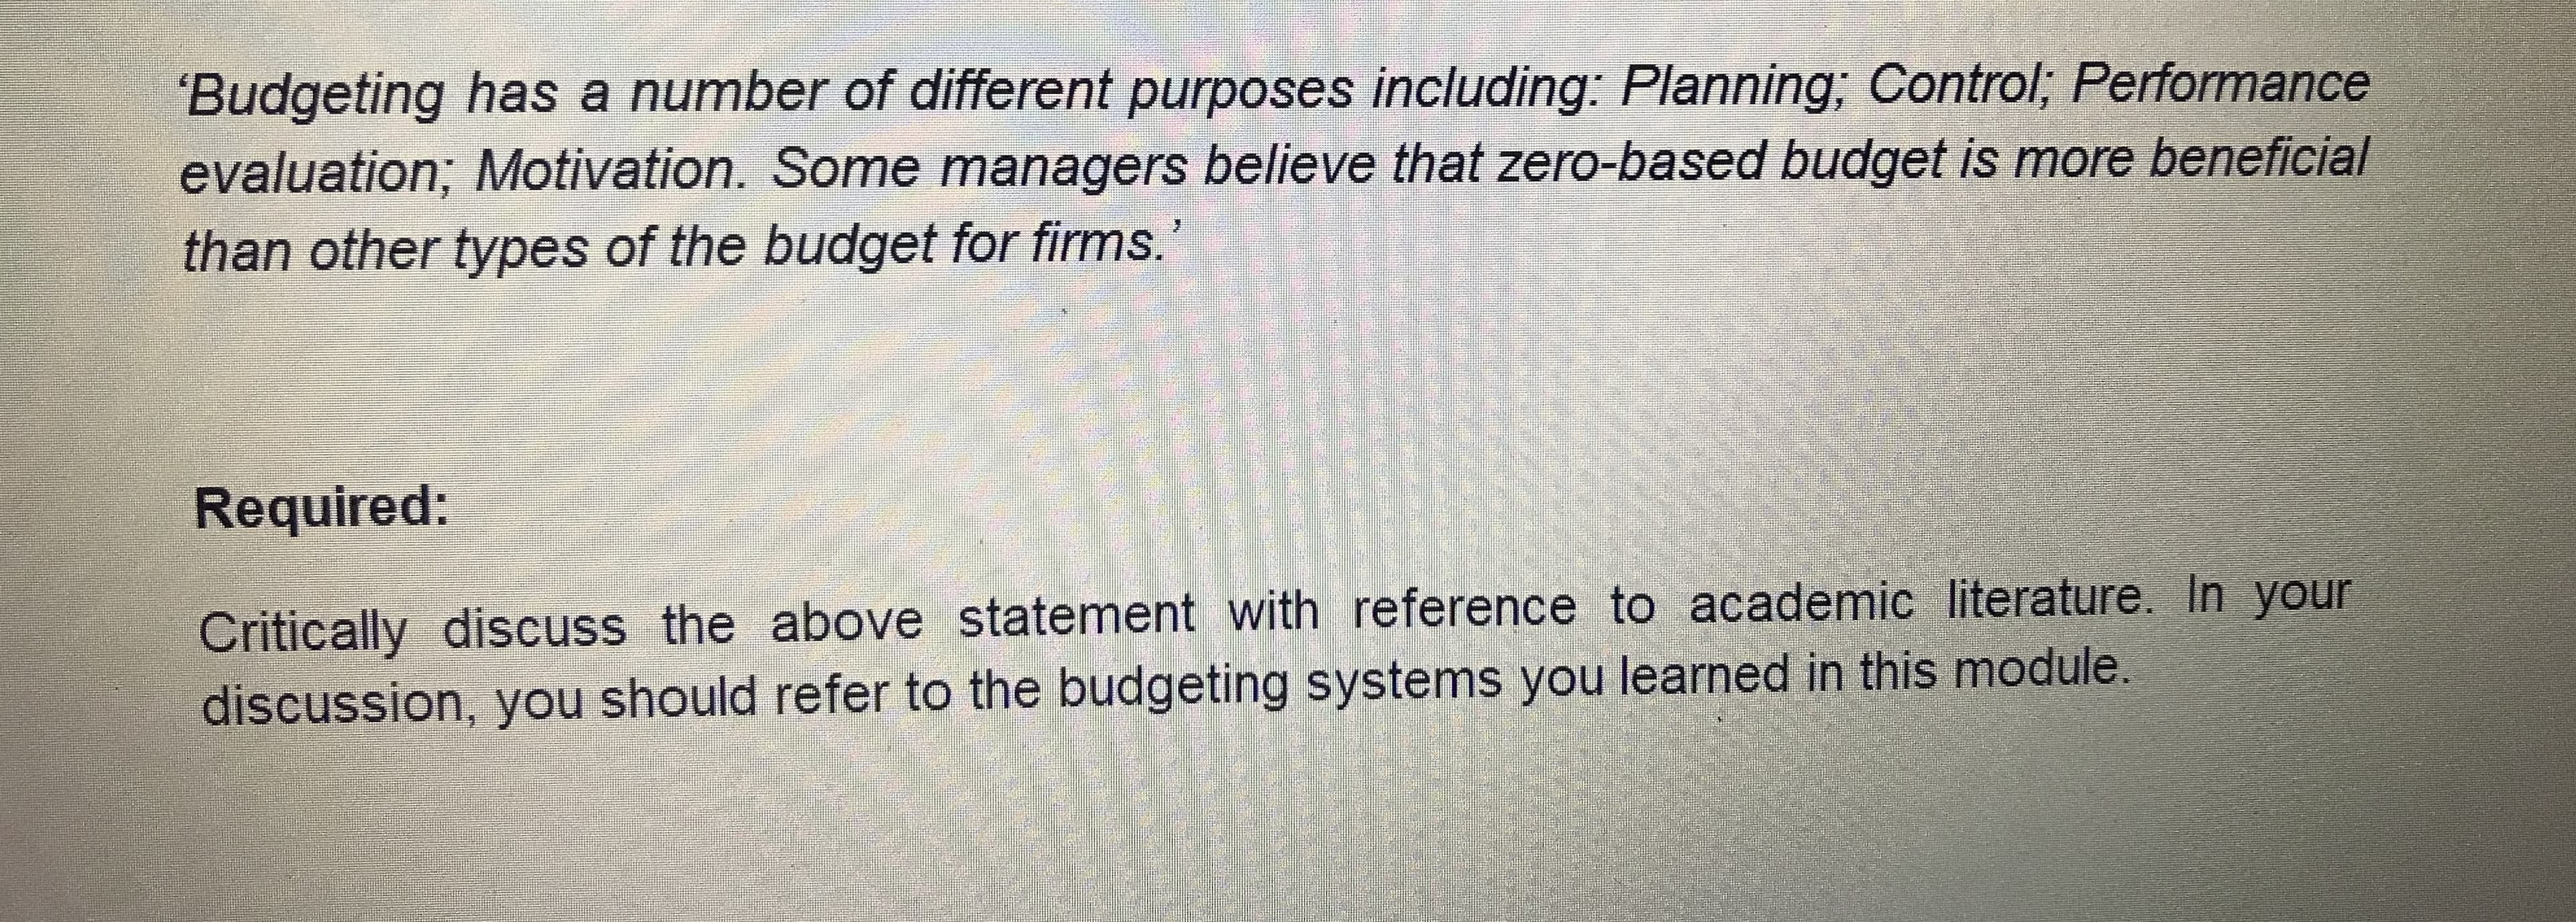 'Budgeting has a number of different purposes including: Planning; Control; Performance
evaluation; Motivation. Some managers believe that zero-based budget is more beneficial
than other types of the budget for firms.
